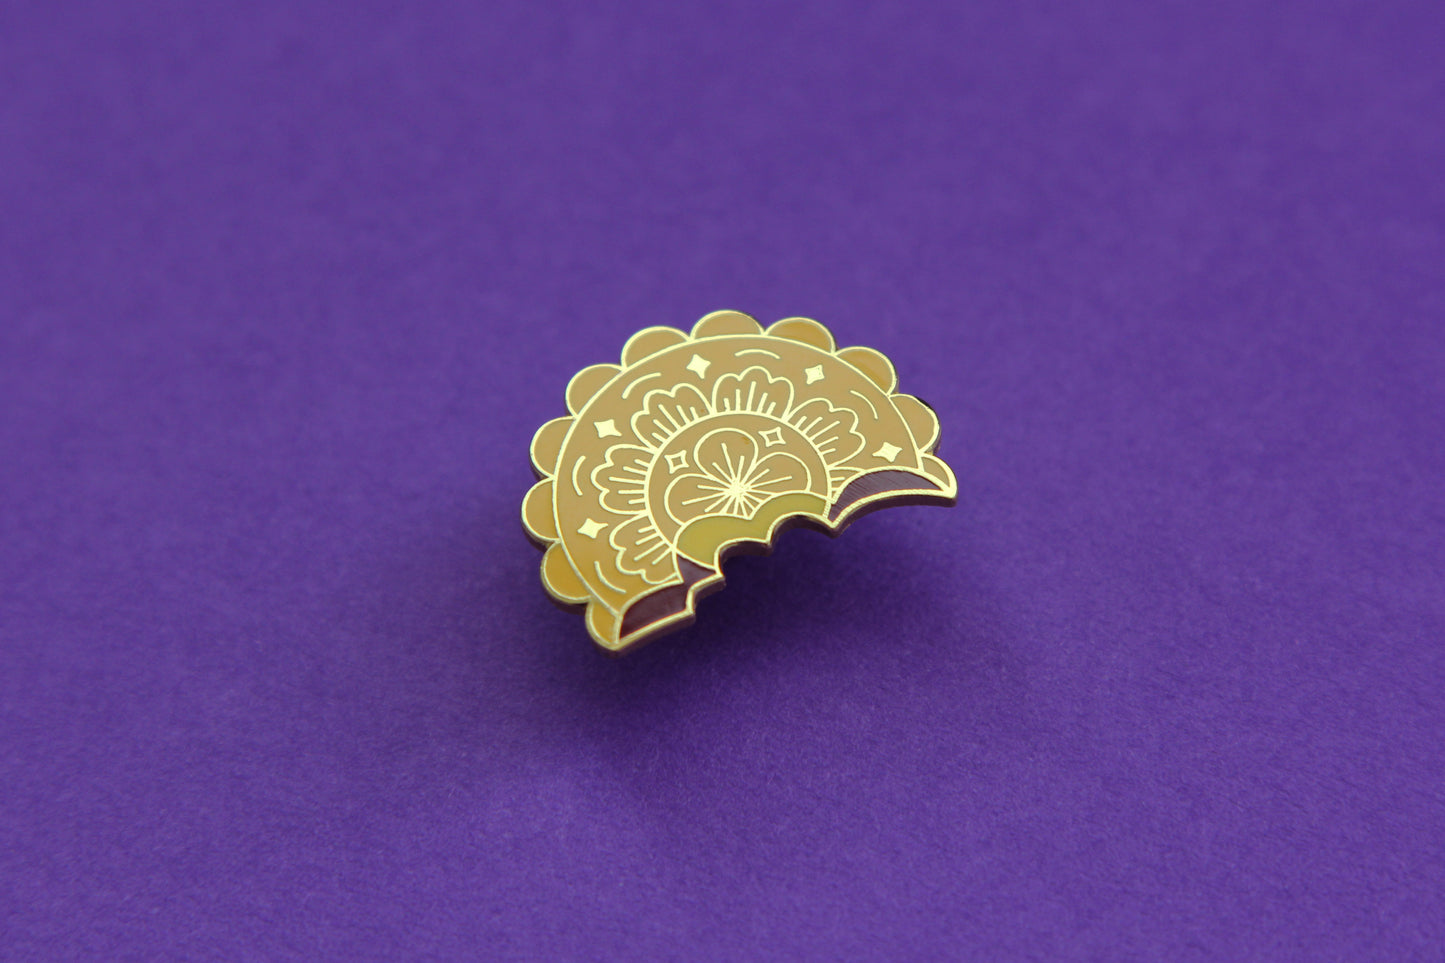 An enamel pin showing a mooncake with a bite out of it over a purple background.